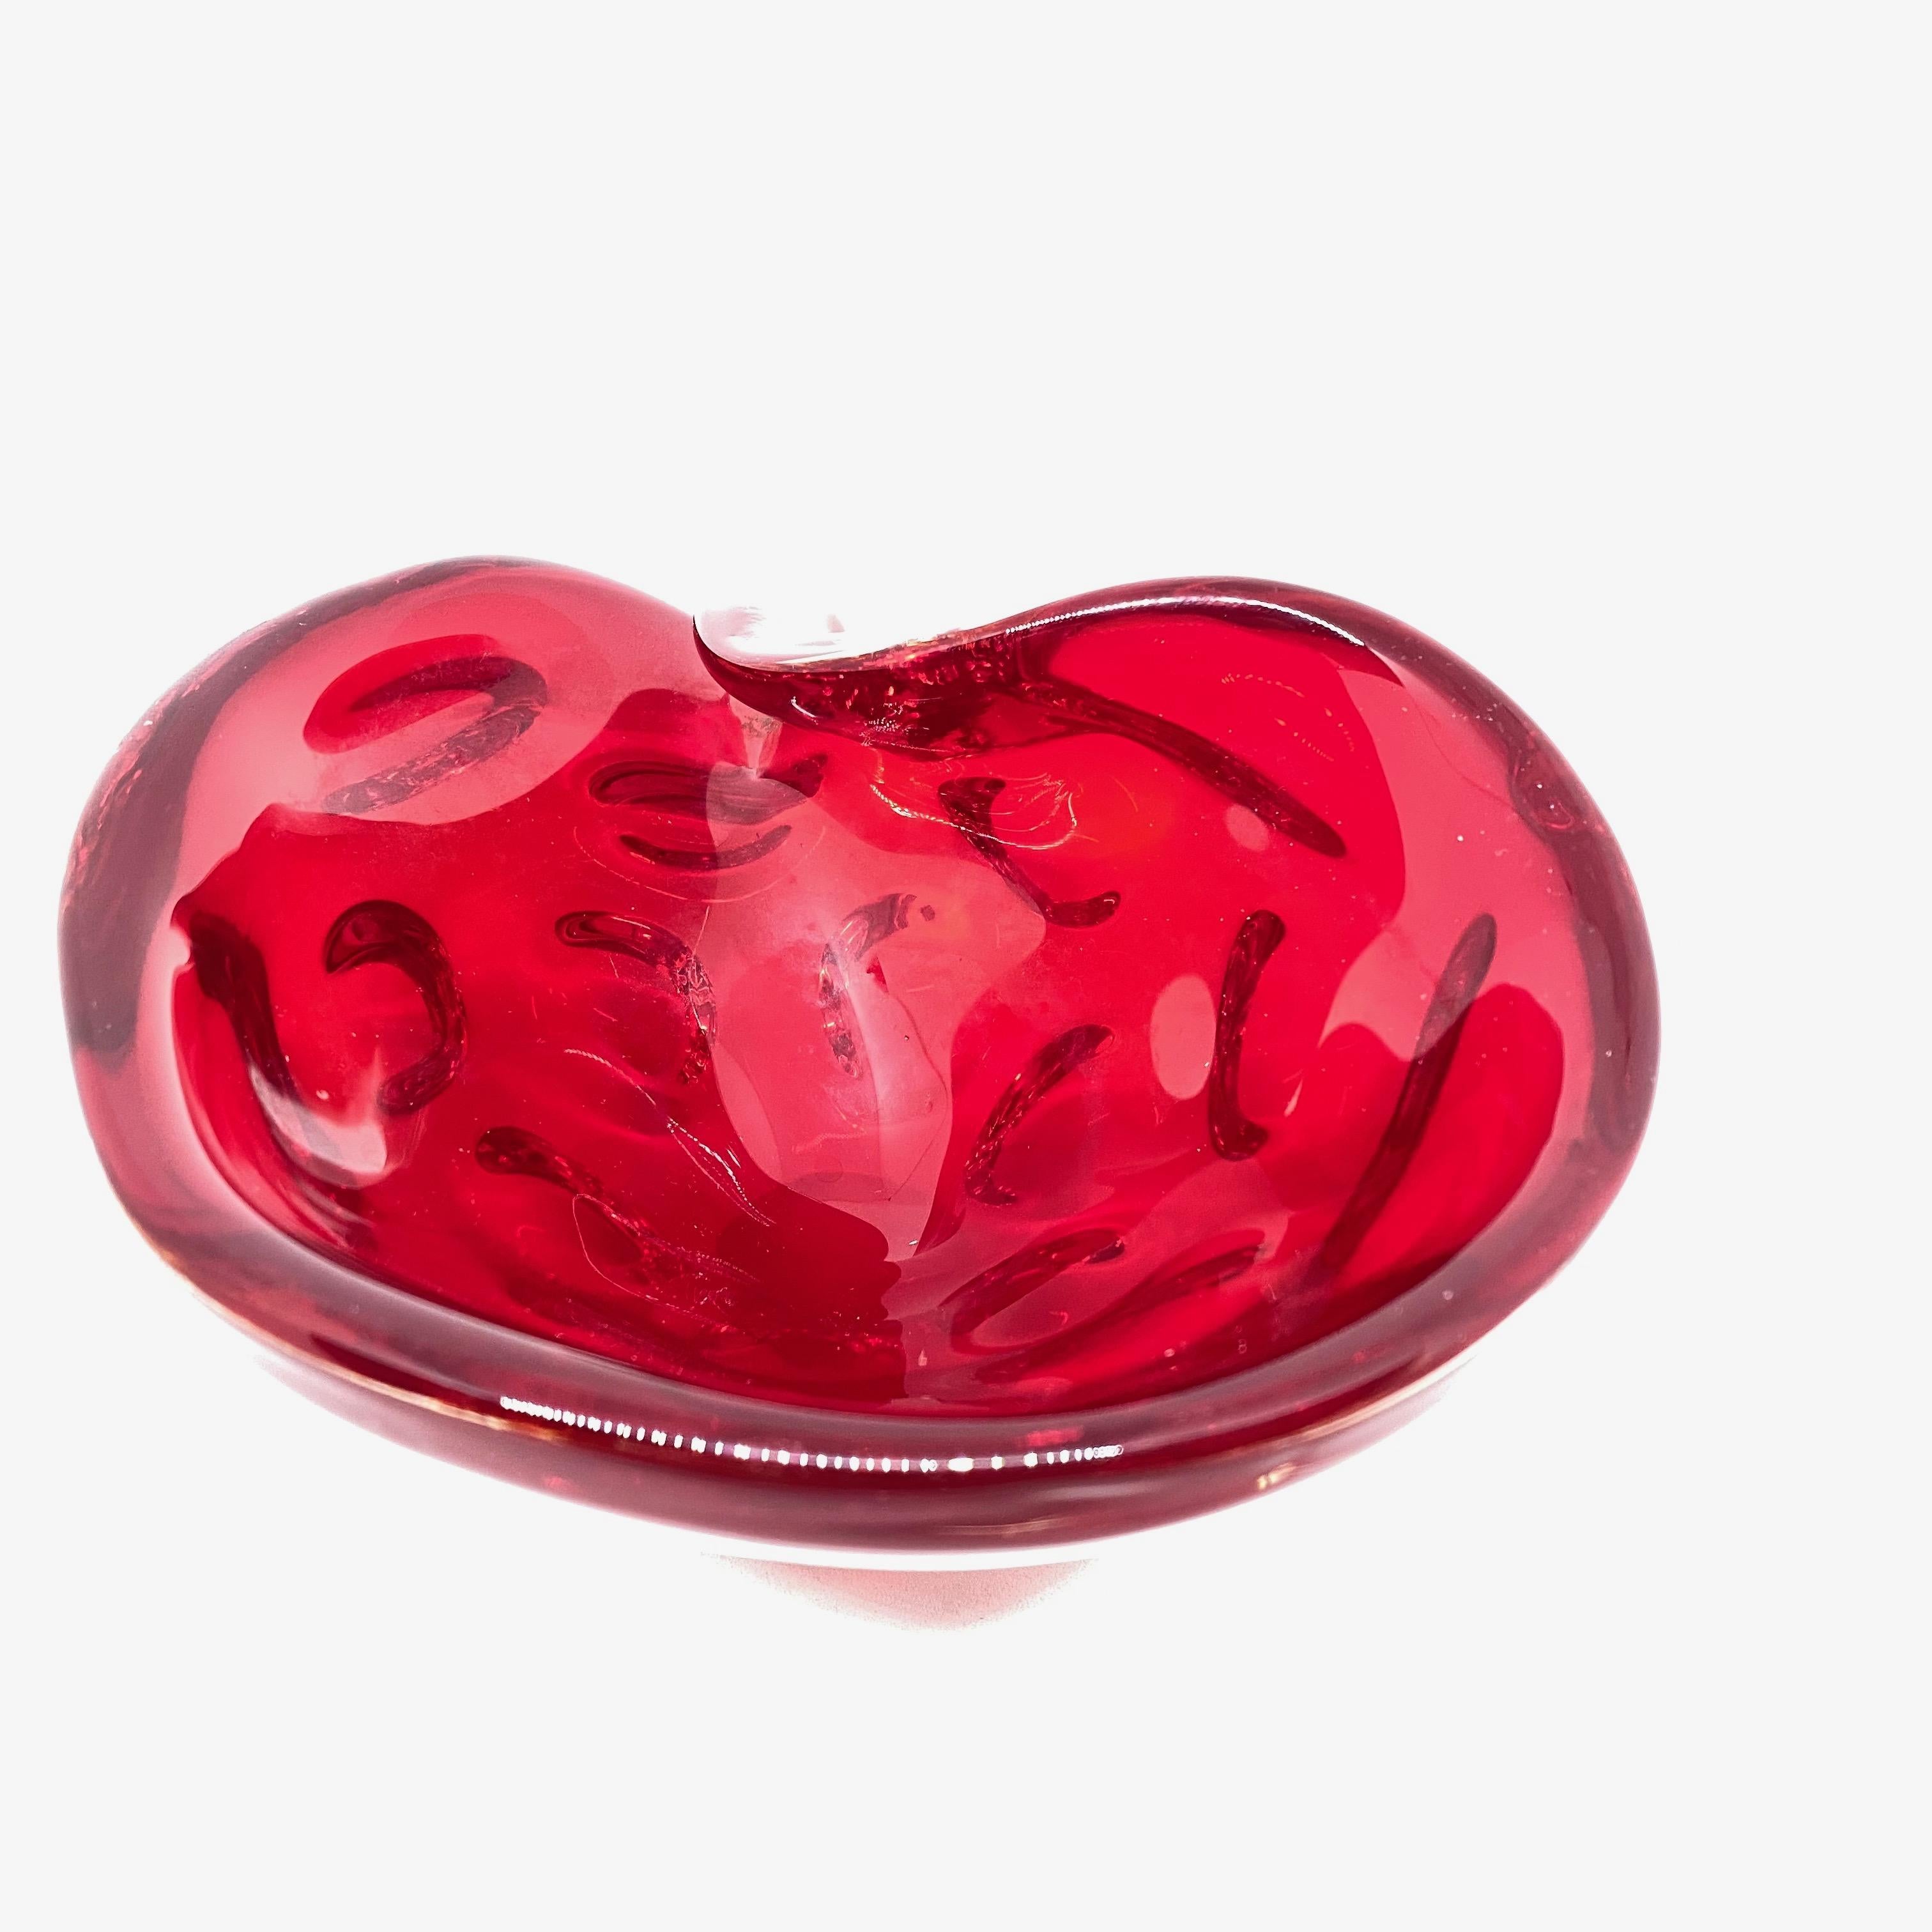 Gorgeous hand blown Murano art glass piece with Sommerso and bullicante techniques. A beautiful organic conch sea shell shaped bowl, catchall or ashtray in deep red, Italy, 1980s.